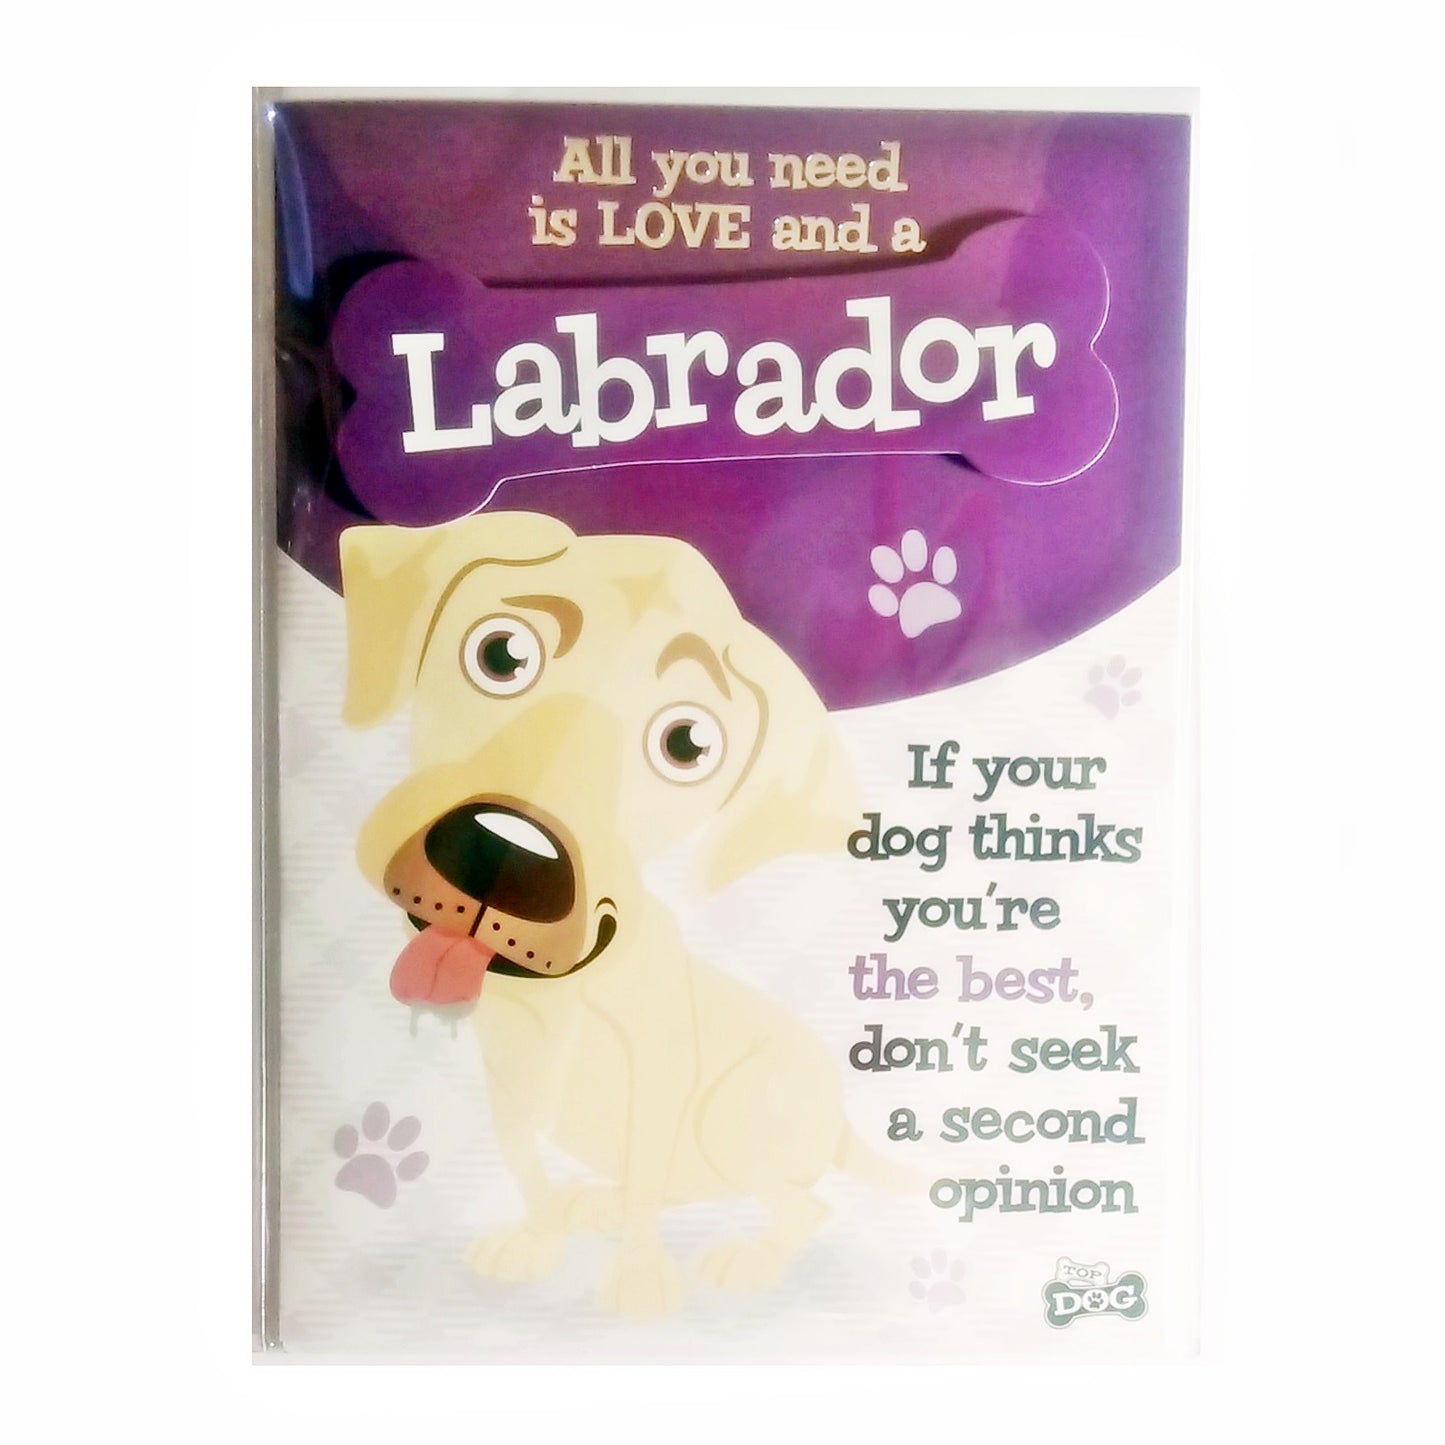 Wags & Whiskers Dog Greeting Card "Labrador Cream" by Paper Island